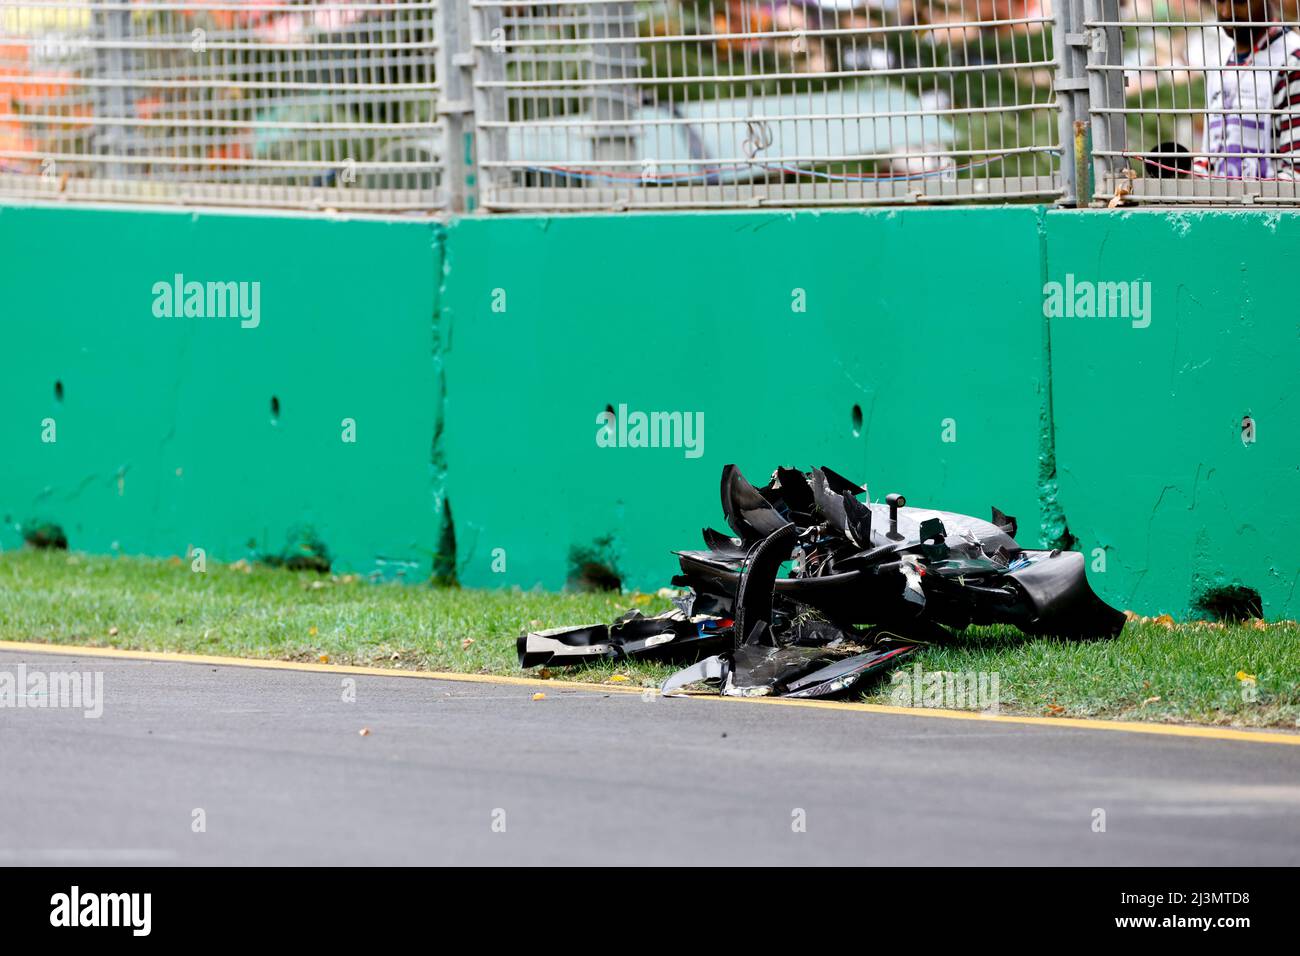 Melbourne, Australia. 9th Apr, 2022. Debris pictured following the crash of #6 Nicholas Latifi (CAN, Williams Racing), F1 Grand Prix of Australia at Melbourne Grand Prix Circuit on April 9, 2022 in Melbourne, Australia. (Photo by HIGH TWO) Credit: dpa/Alamy Live News Stock Photo